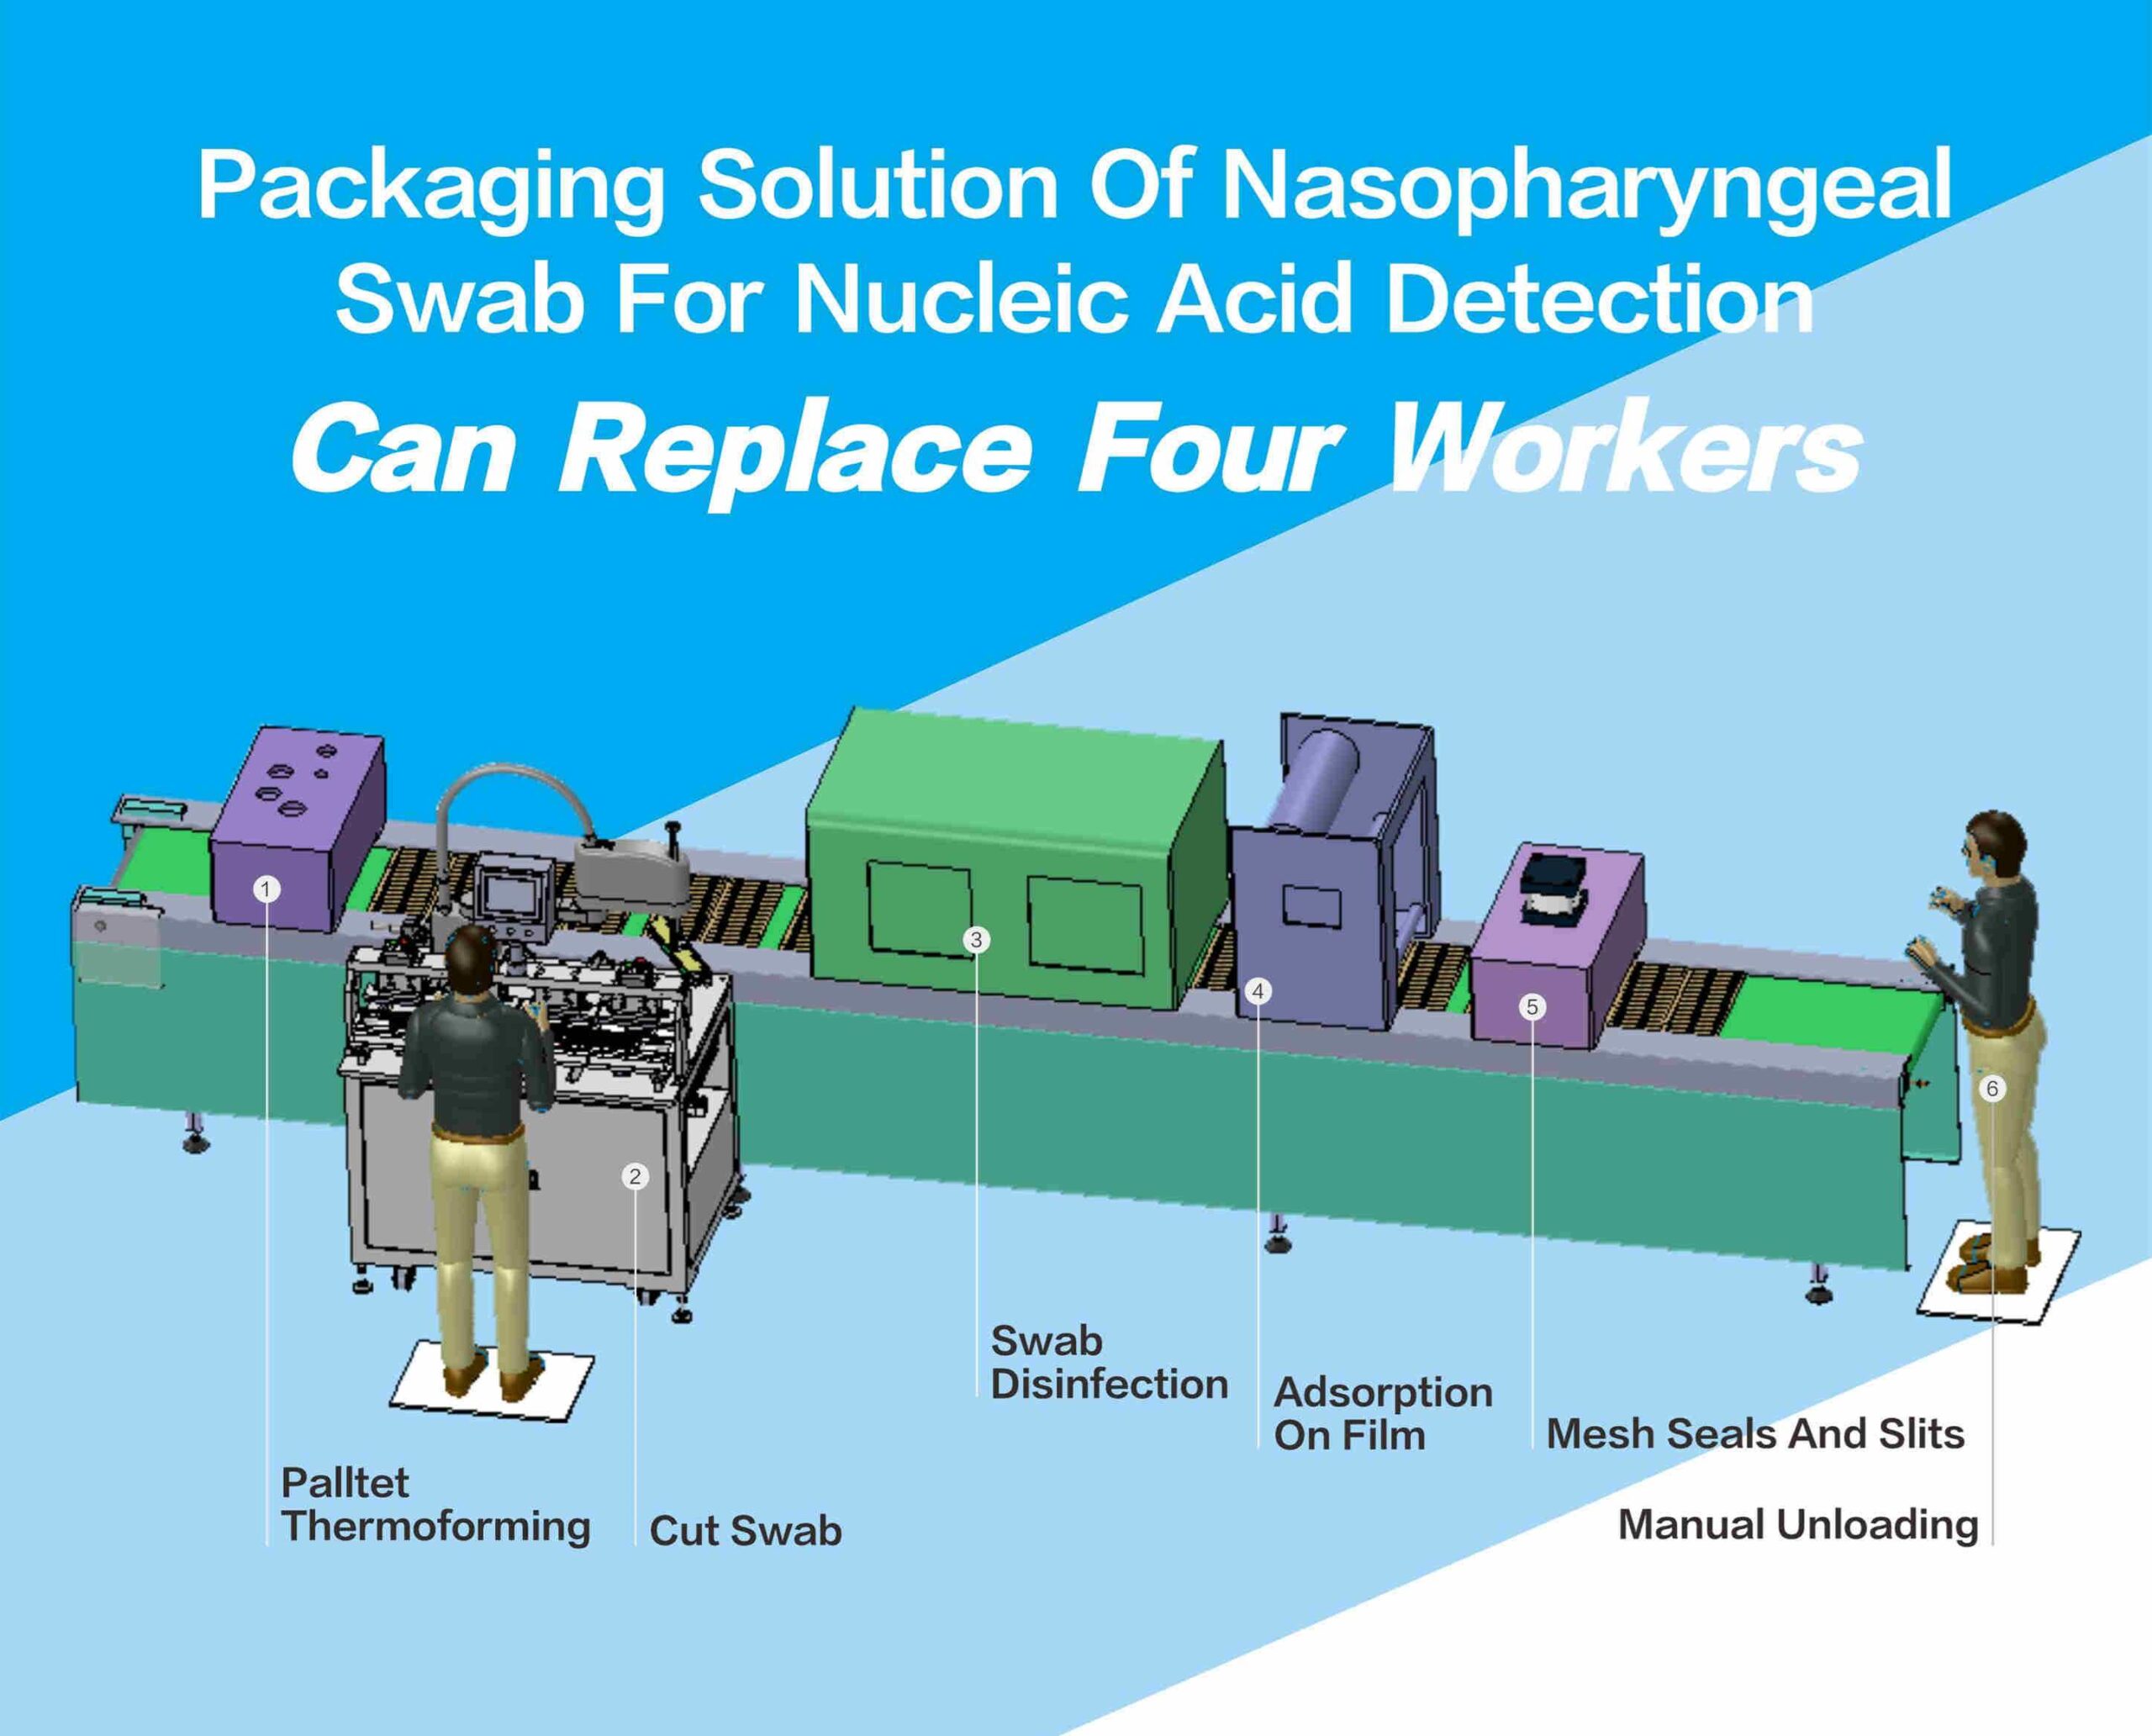 Packaging Solution Of Nasopharyngeal Swab For Nucleic Acid Detection